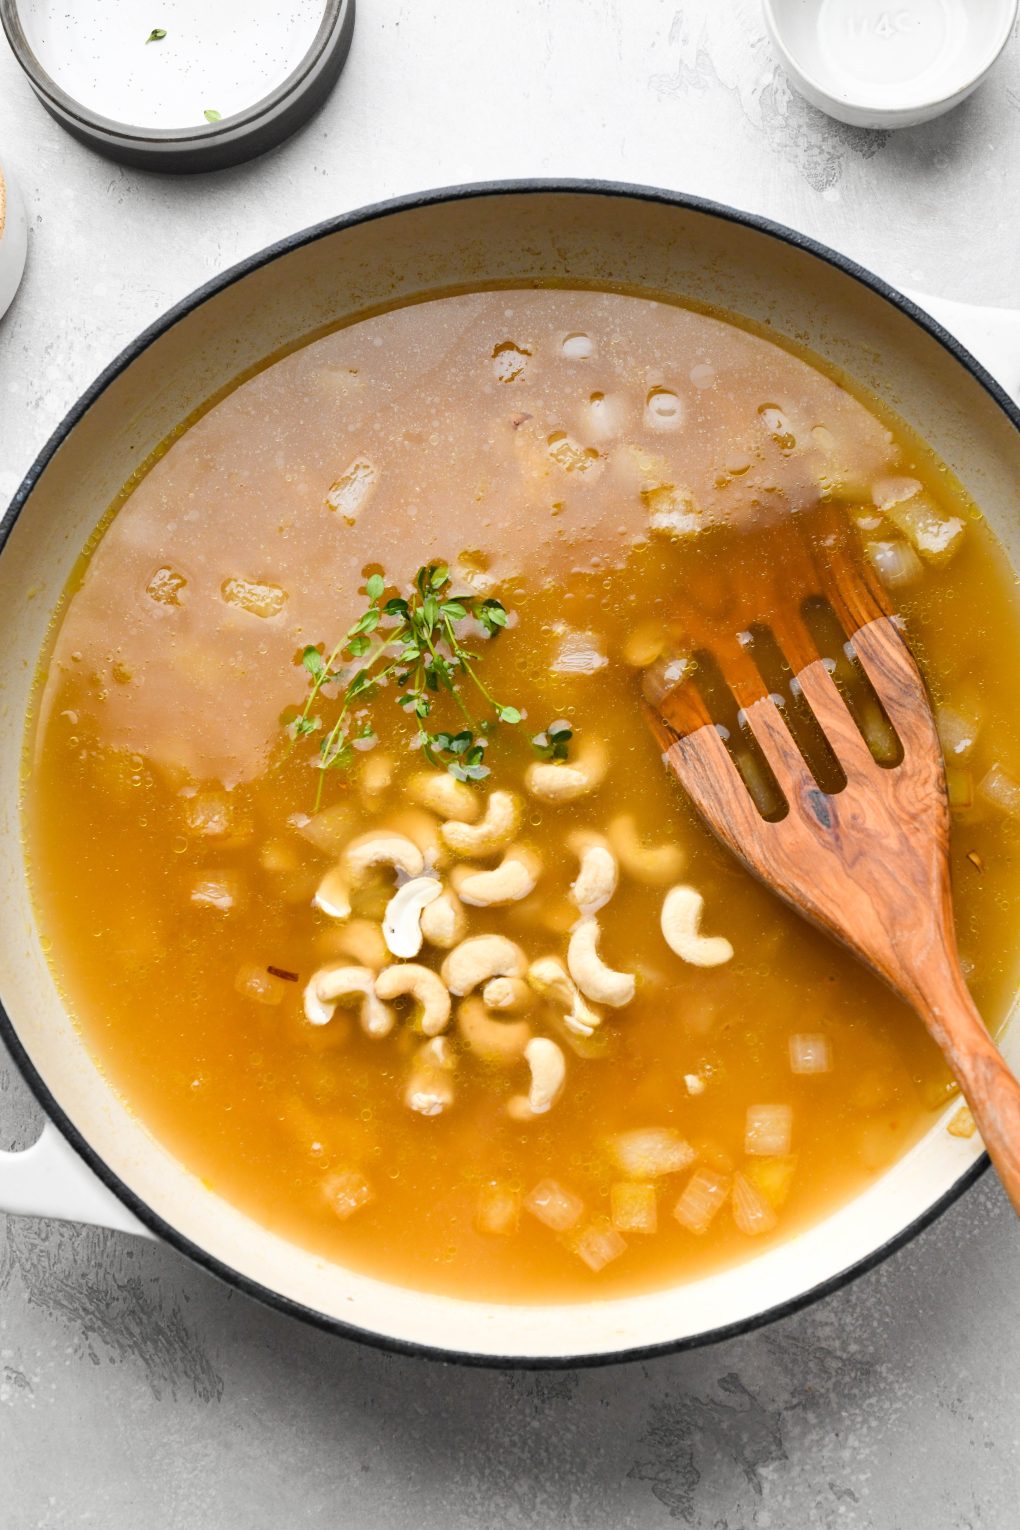 Photos showing how to make Whole30 gravy - broth poured into skillet with diced onions, raw cashews, and fresh thyme.